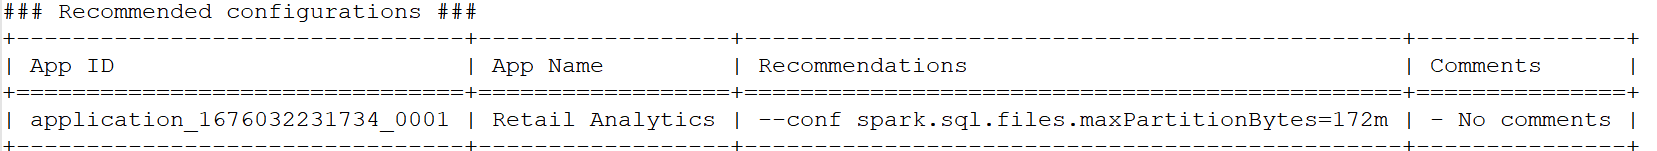 Screenshot of recommended configuration settings output: --conf spark.sql.files.maxPartitionBytes=172m.